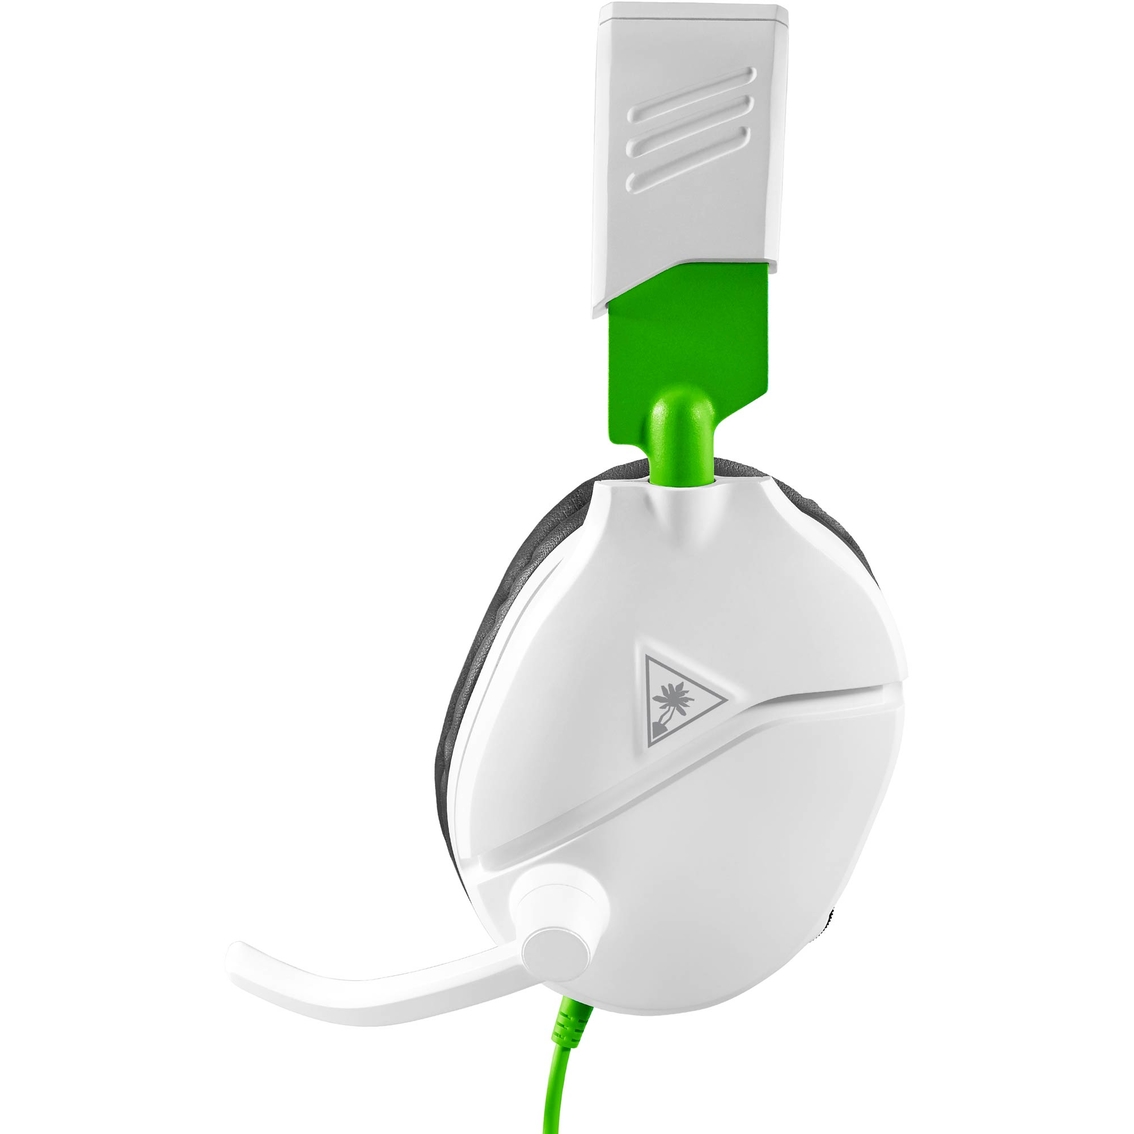 Turtle Beach Recon 70 White Gaming Headset for Xbox One - Image 4 of 10